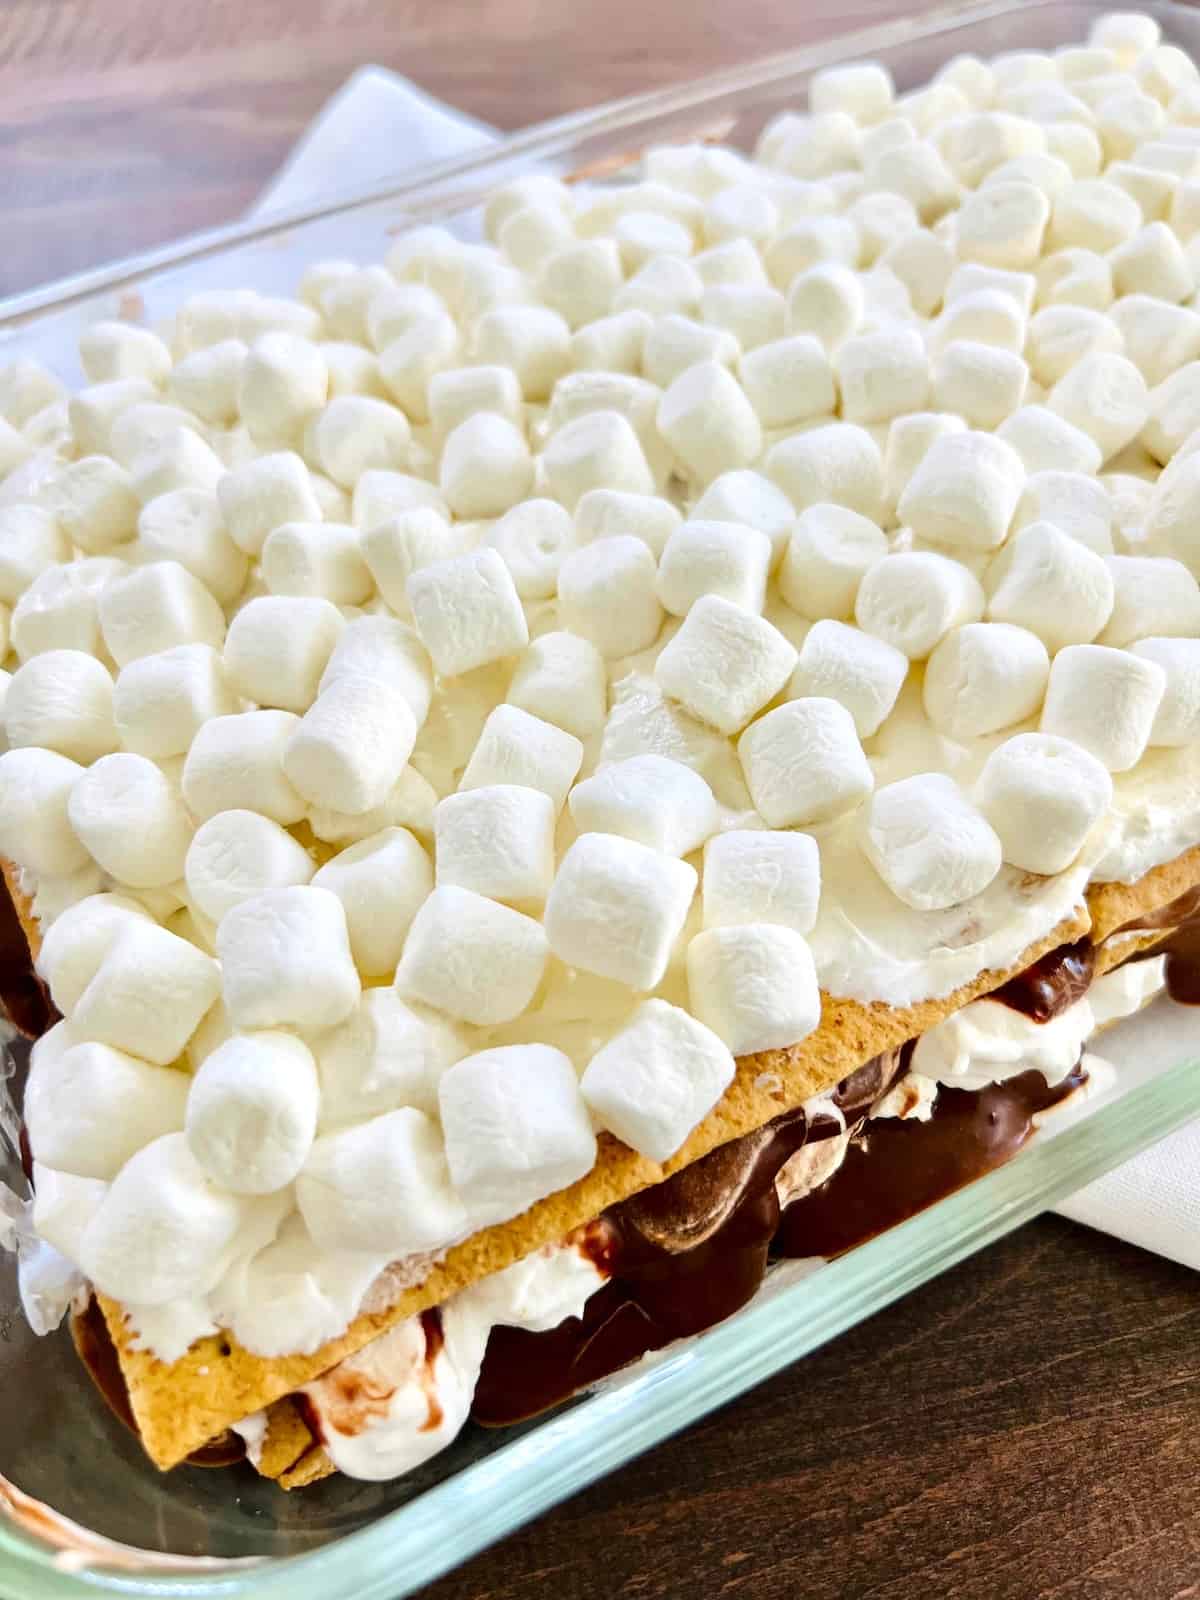 S’mores Icebox Cake All layers done with mini marshmallows on top.